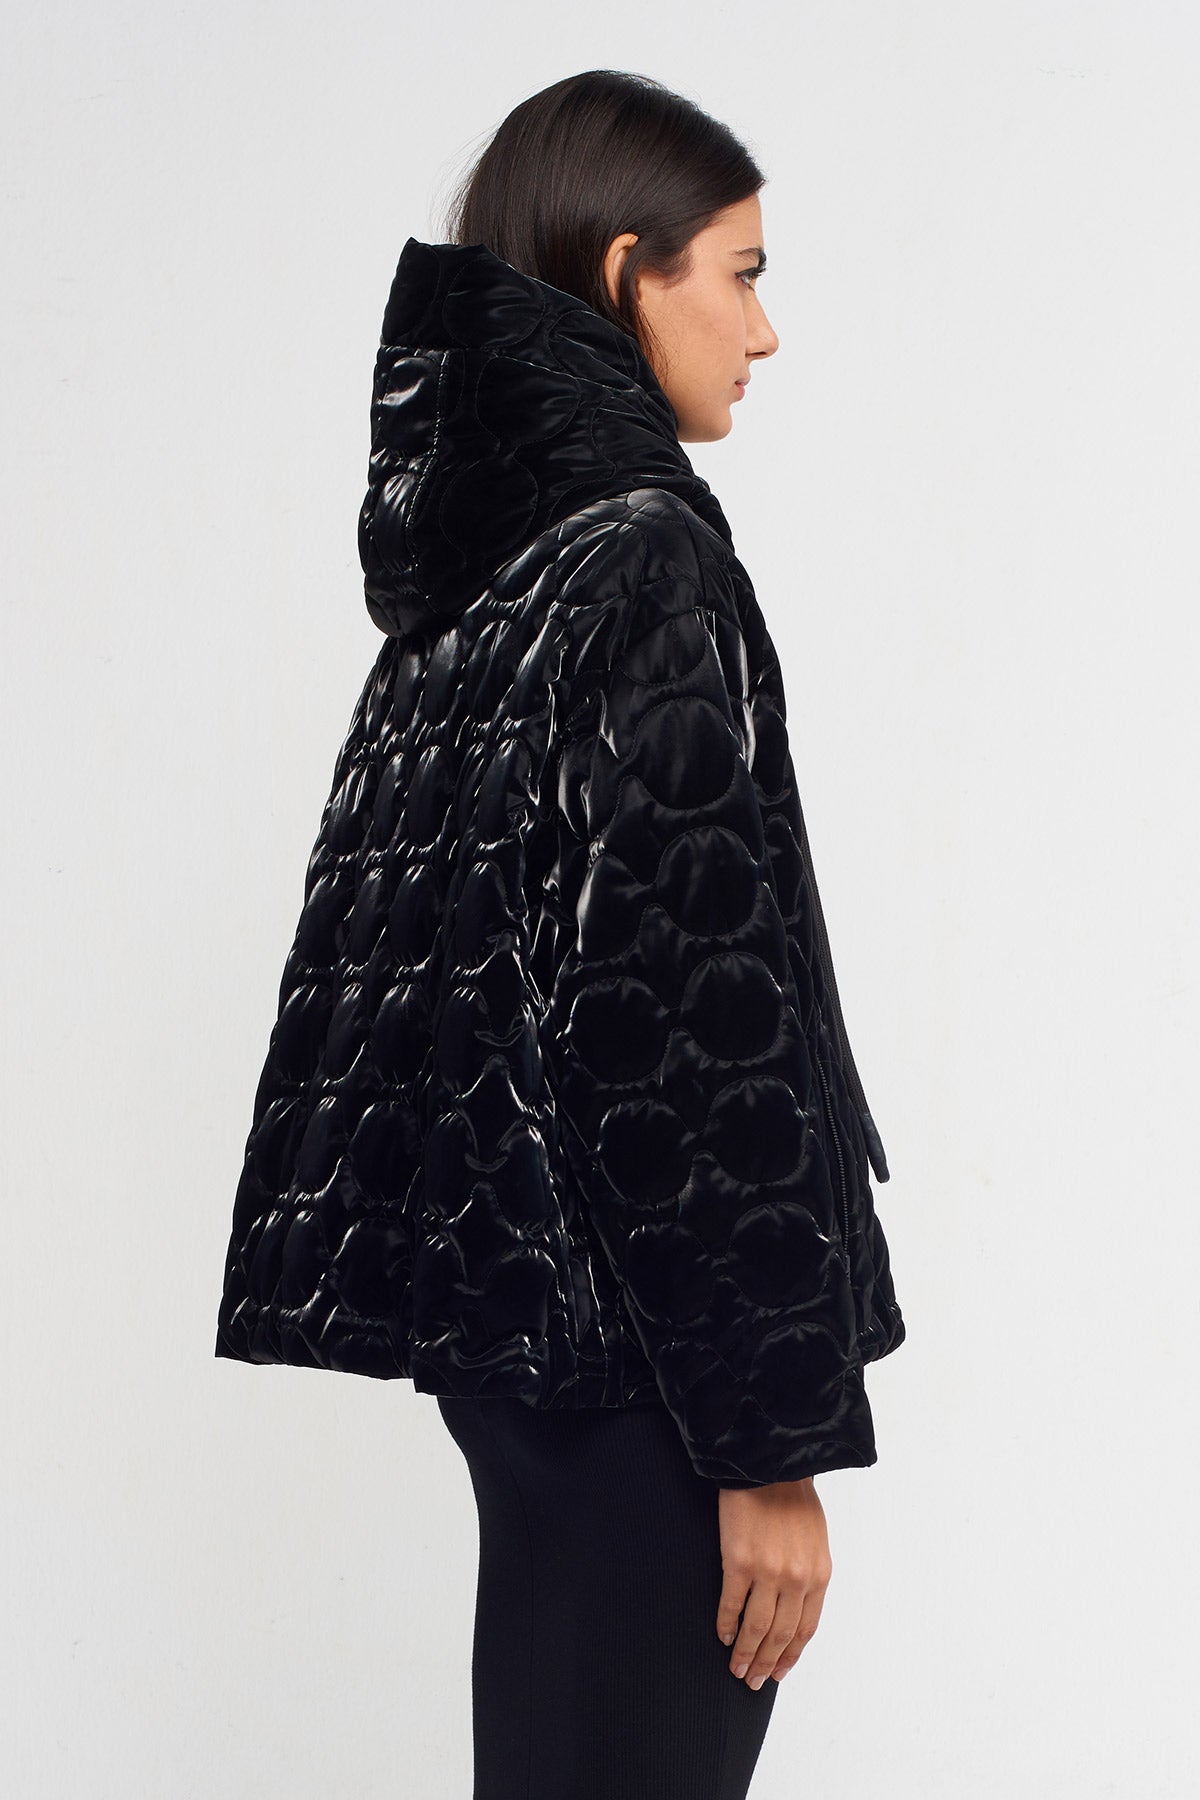 Black Shiny Quilted Puffer Coat-K235015122